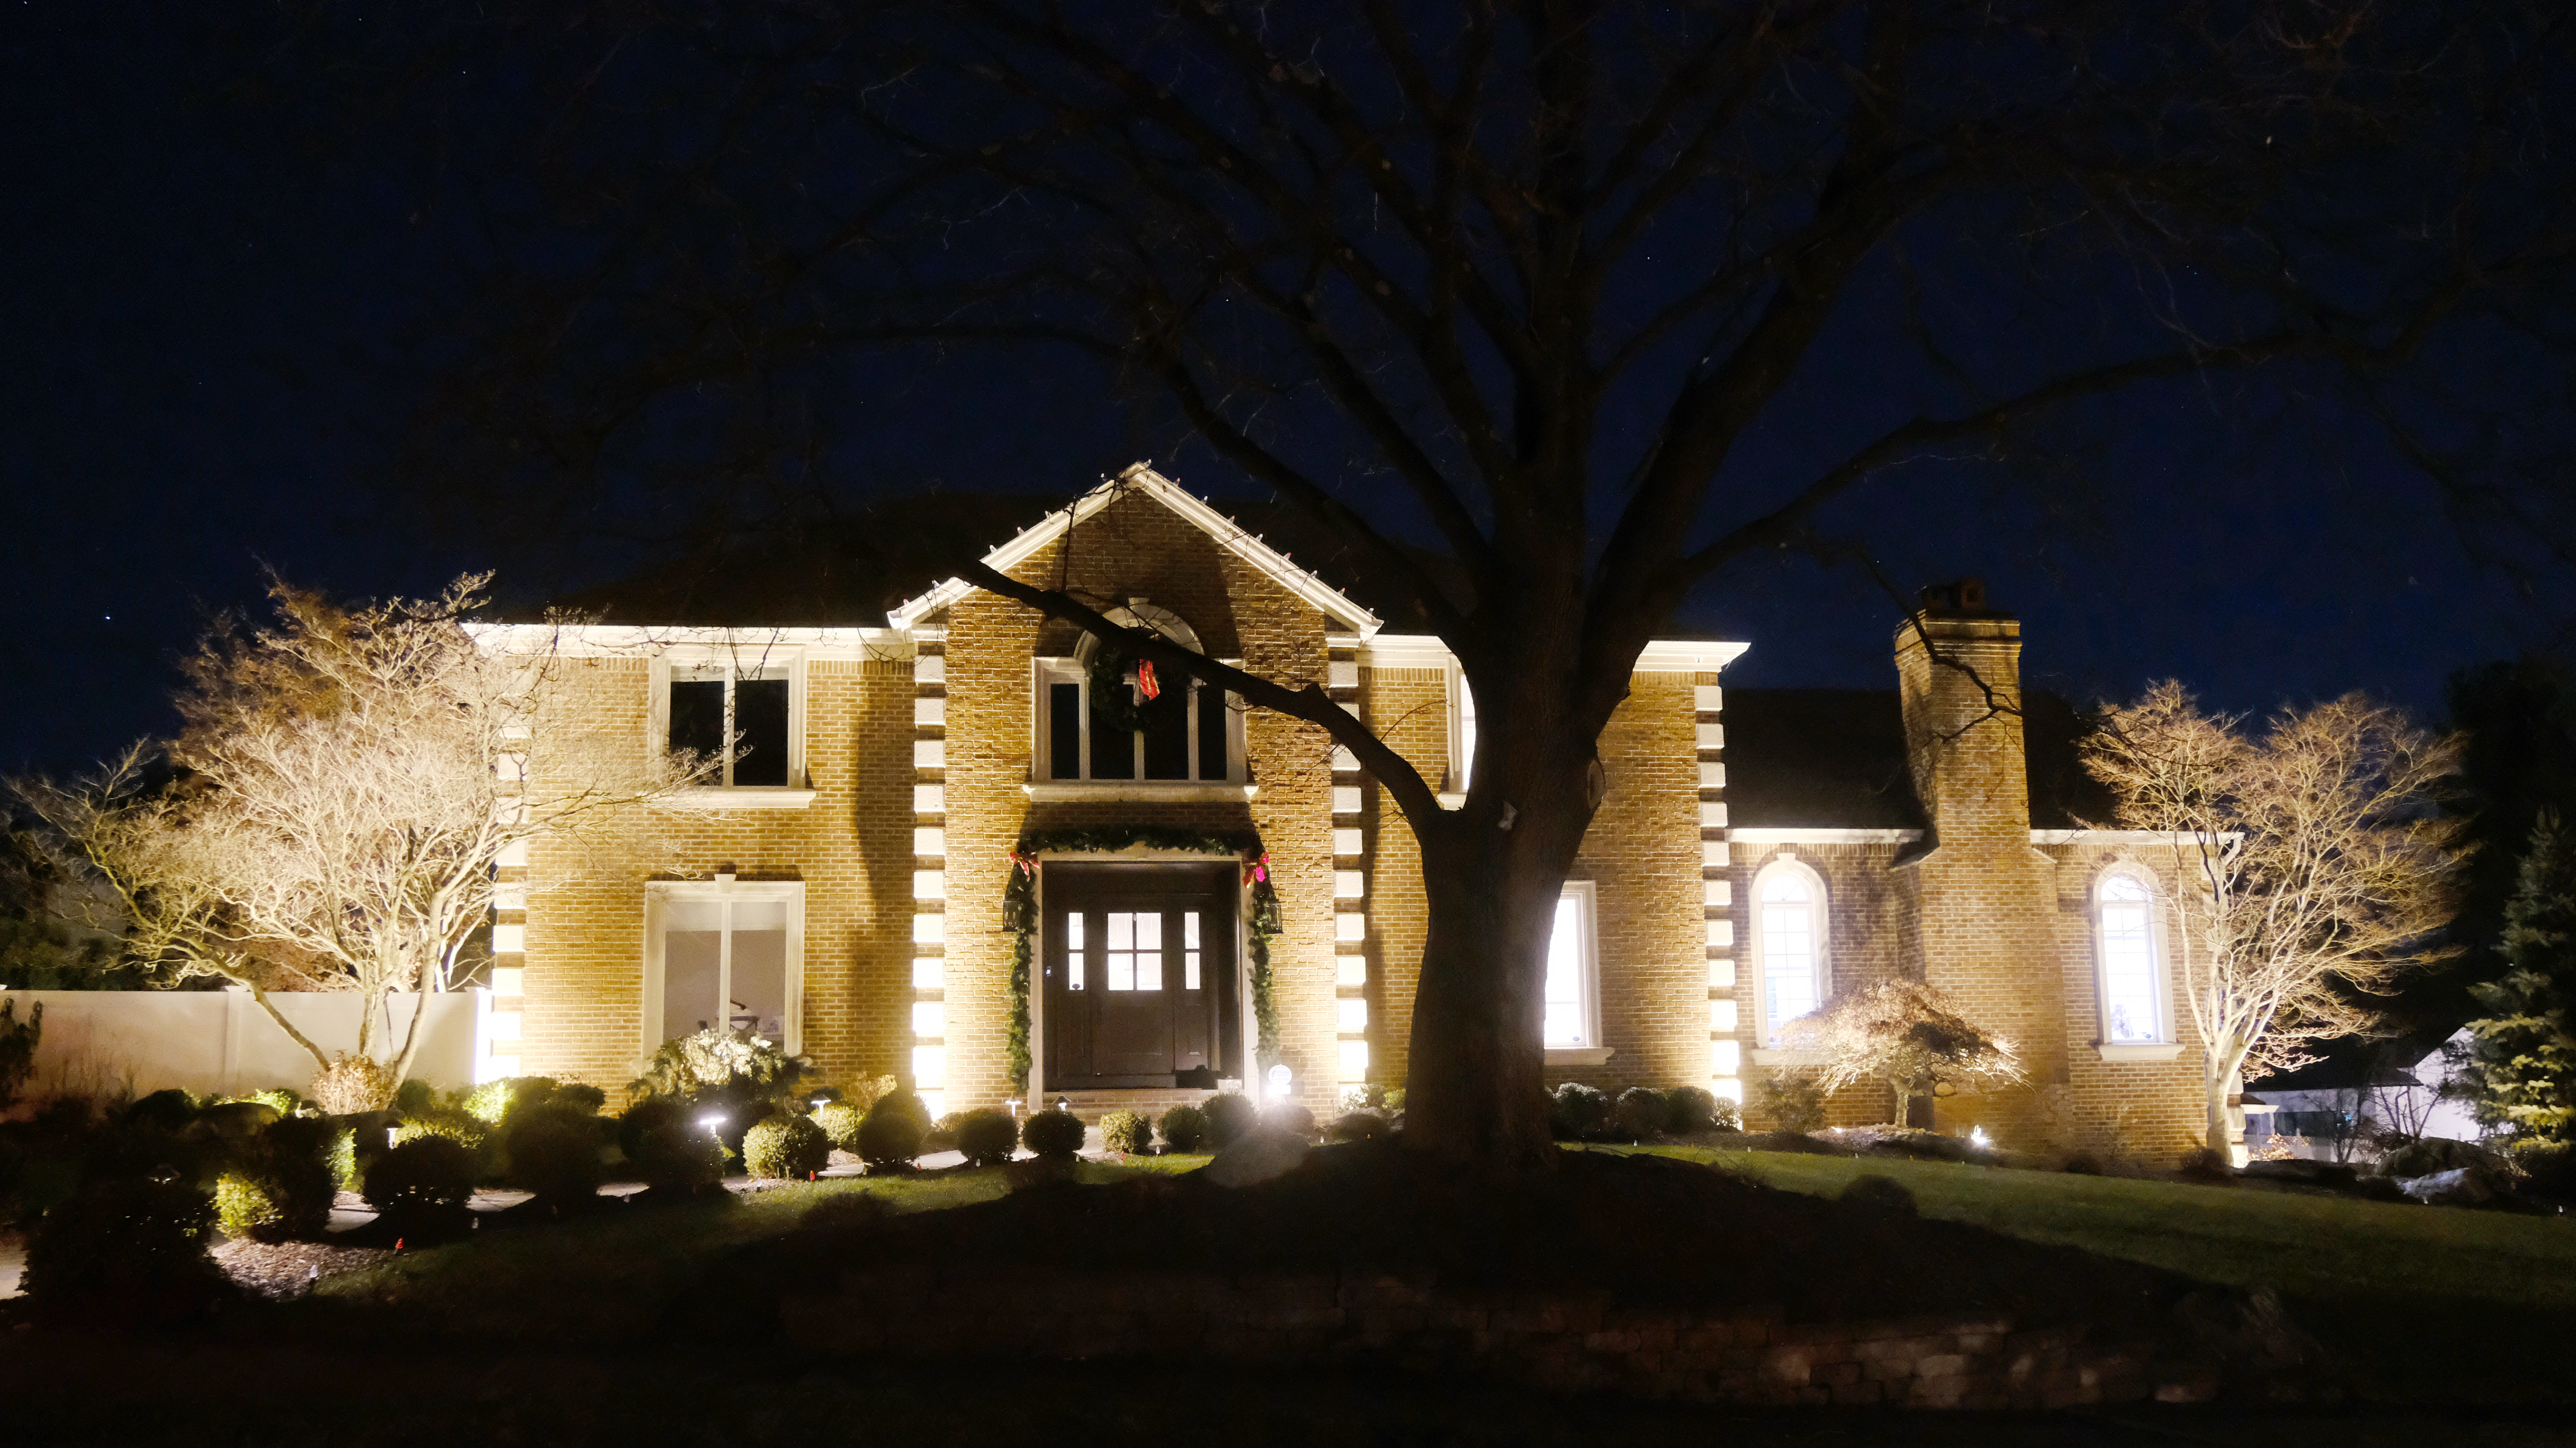 Dolores' home in North Jersey is brightly lit and has some holiday decorations